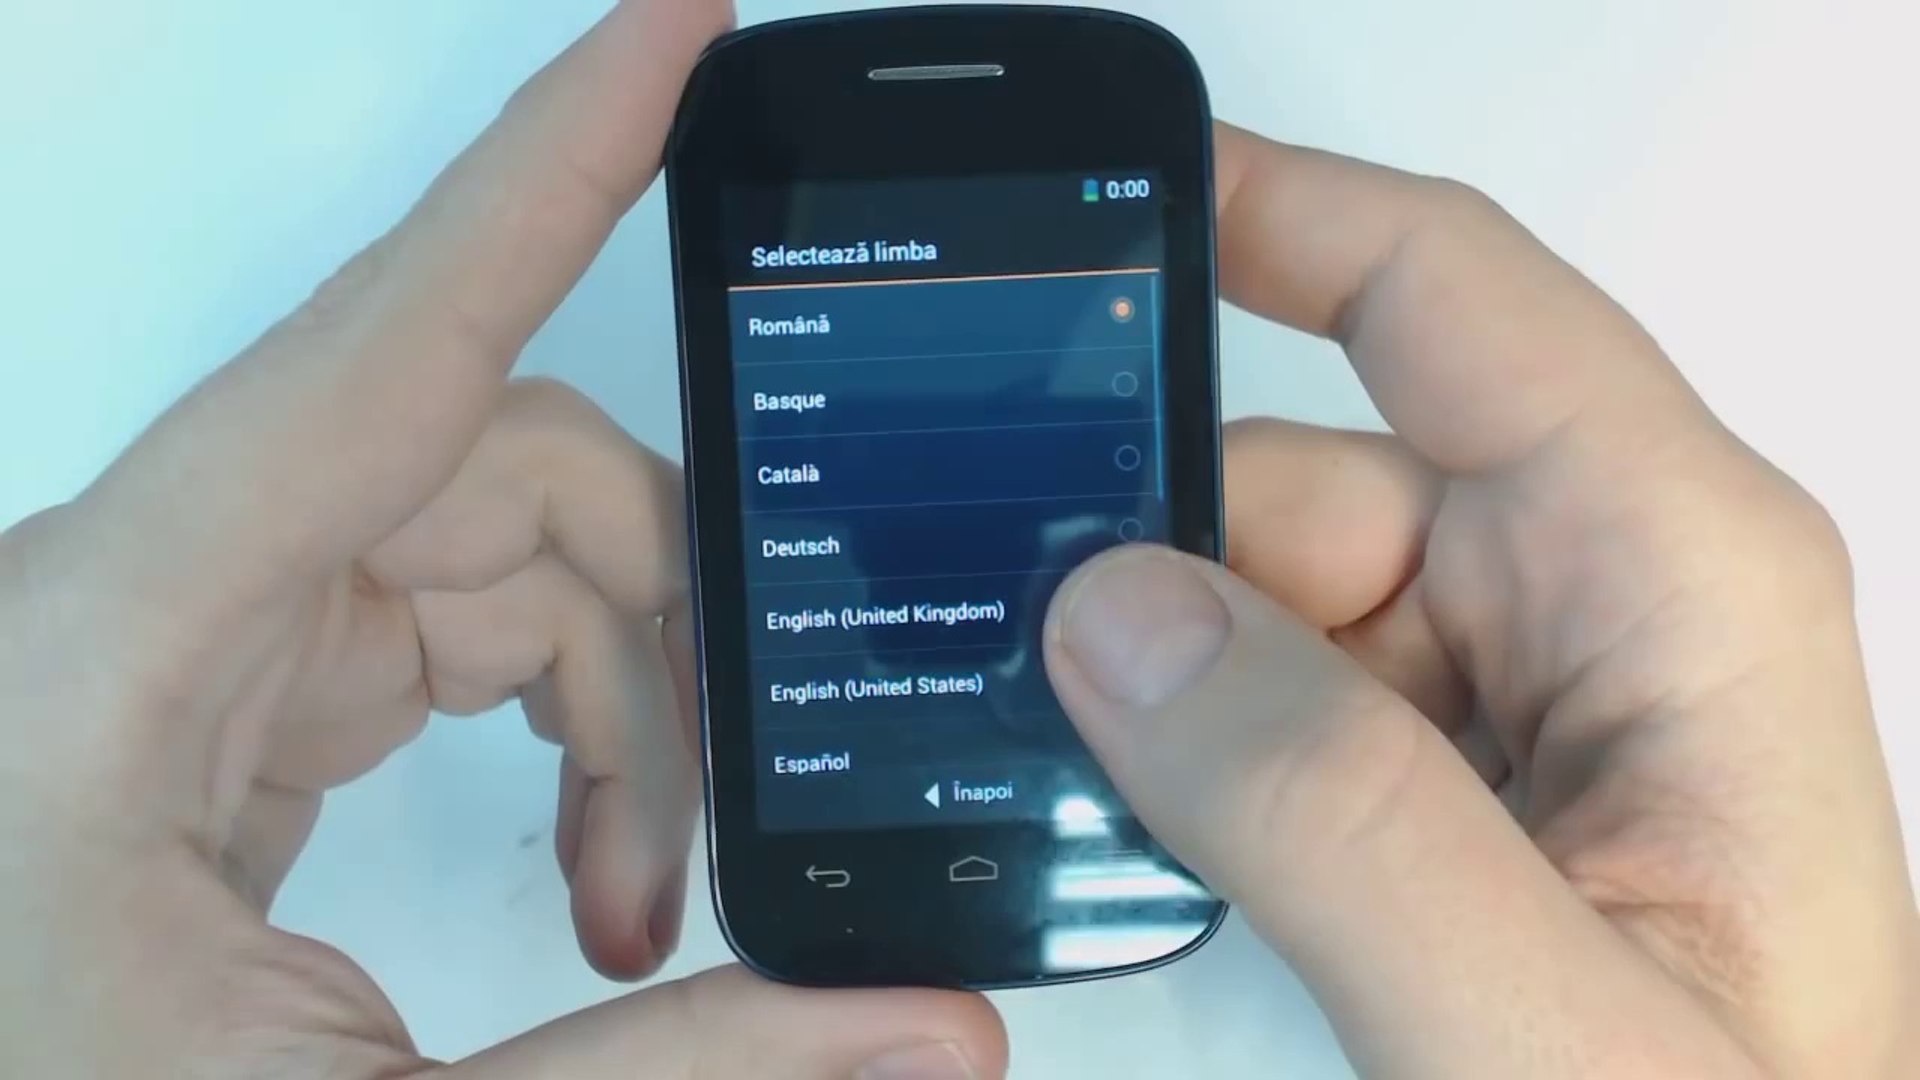 Alcatel One Touch Pop C1 4015X hard reset - Dailymotion Video